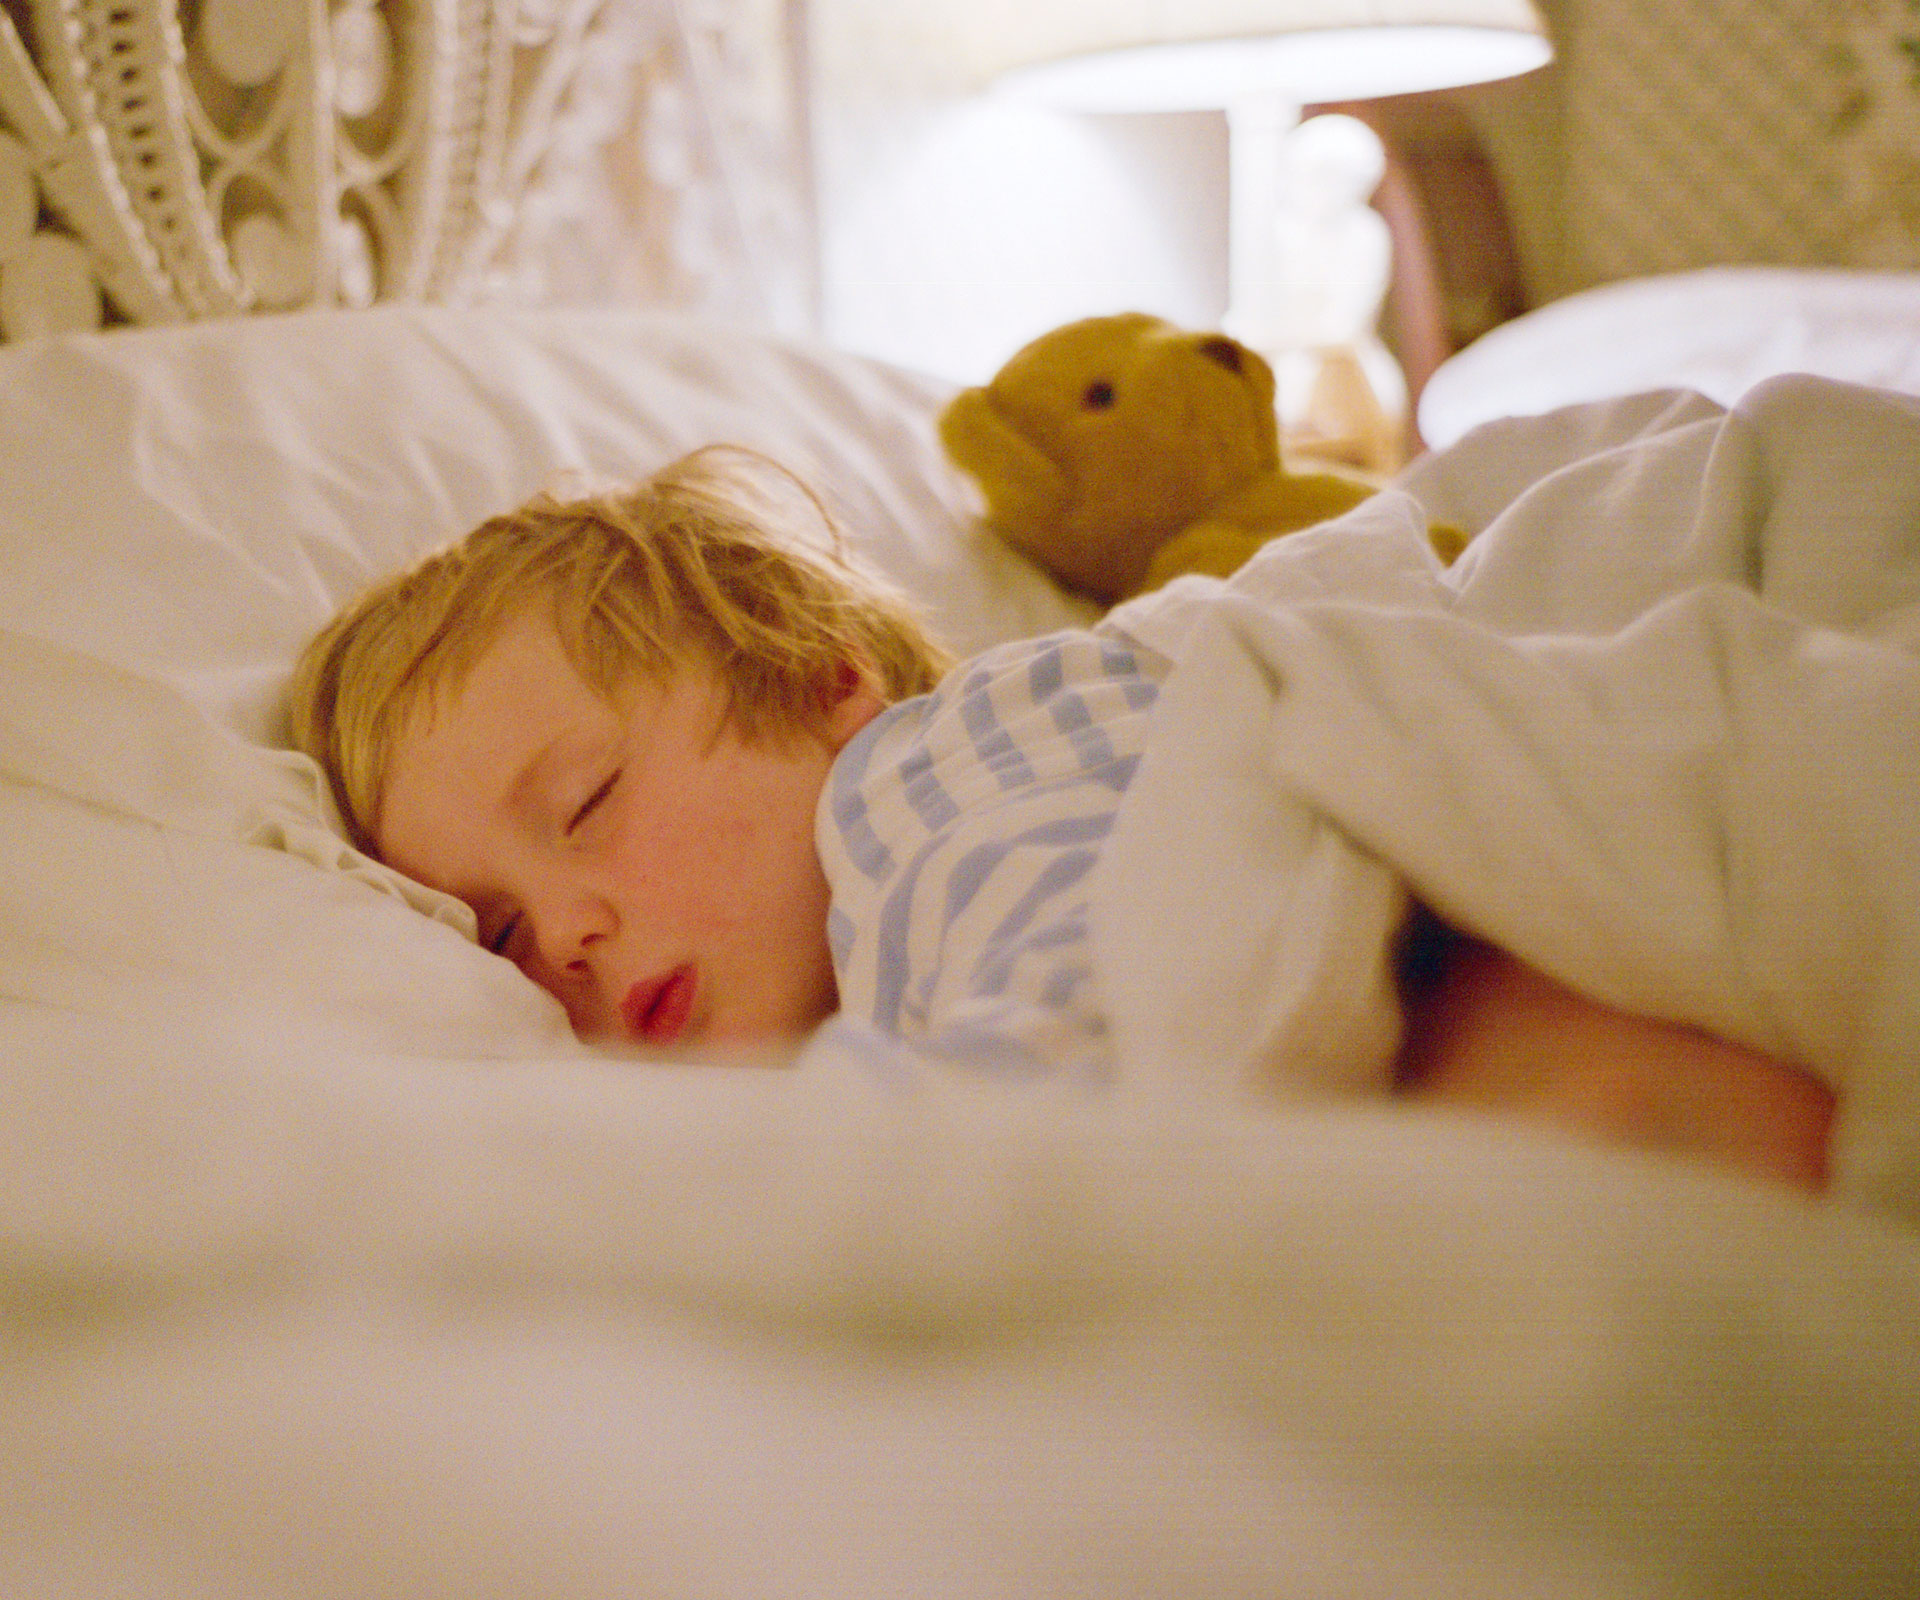 Children who go to bed after 9pm are at risk of being obese